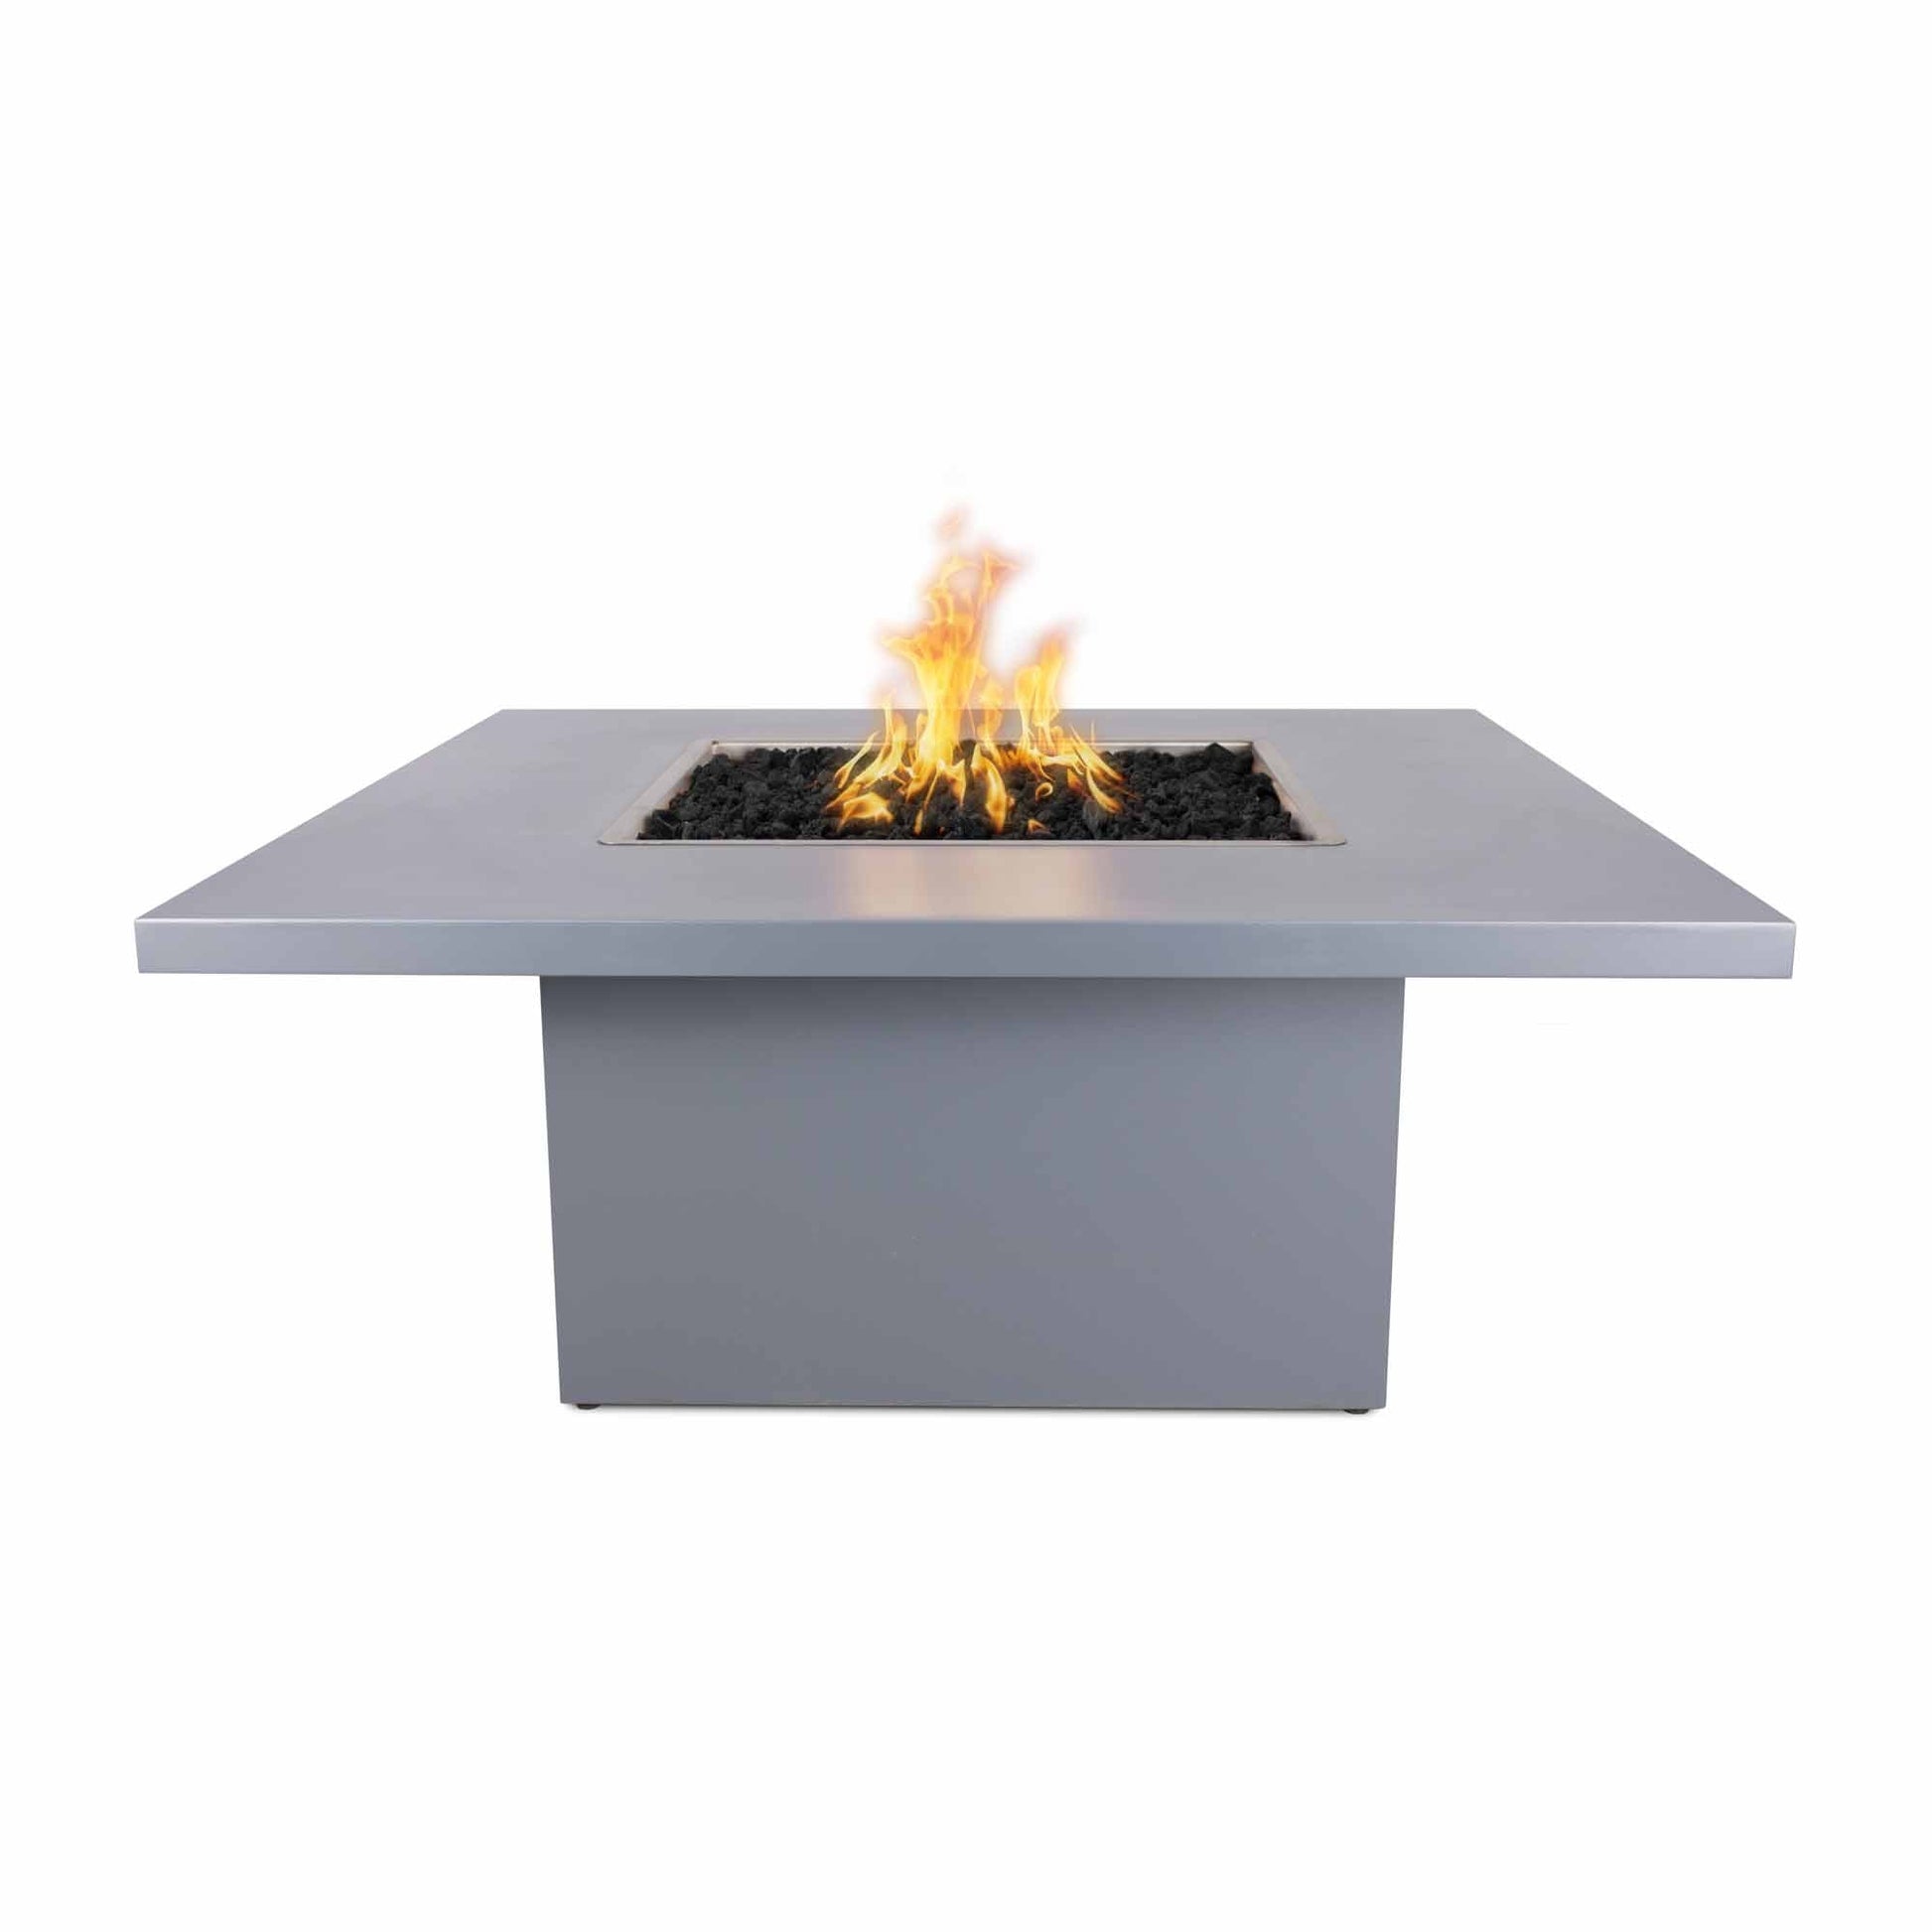 The Outdoor Plus Square Bella 36" Corten Steel Liquid Propane Fire Pit with Match Lit Ignition